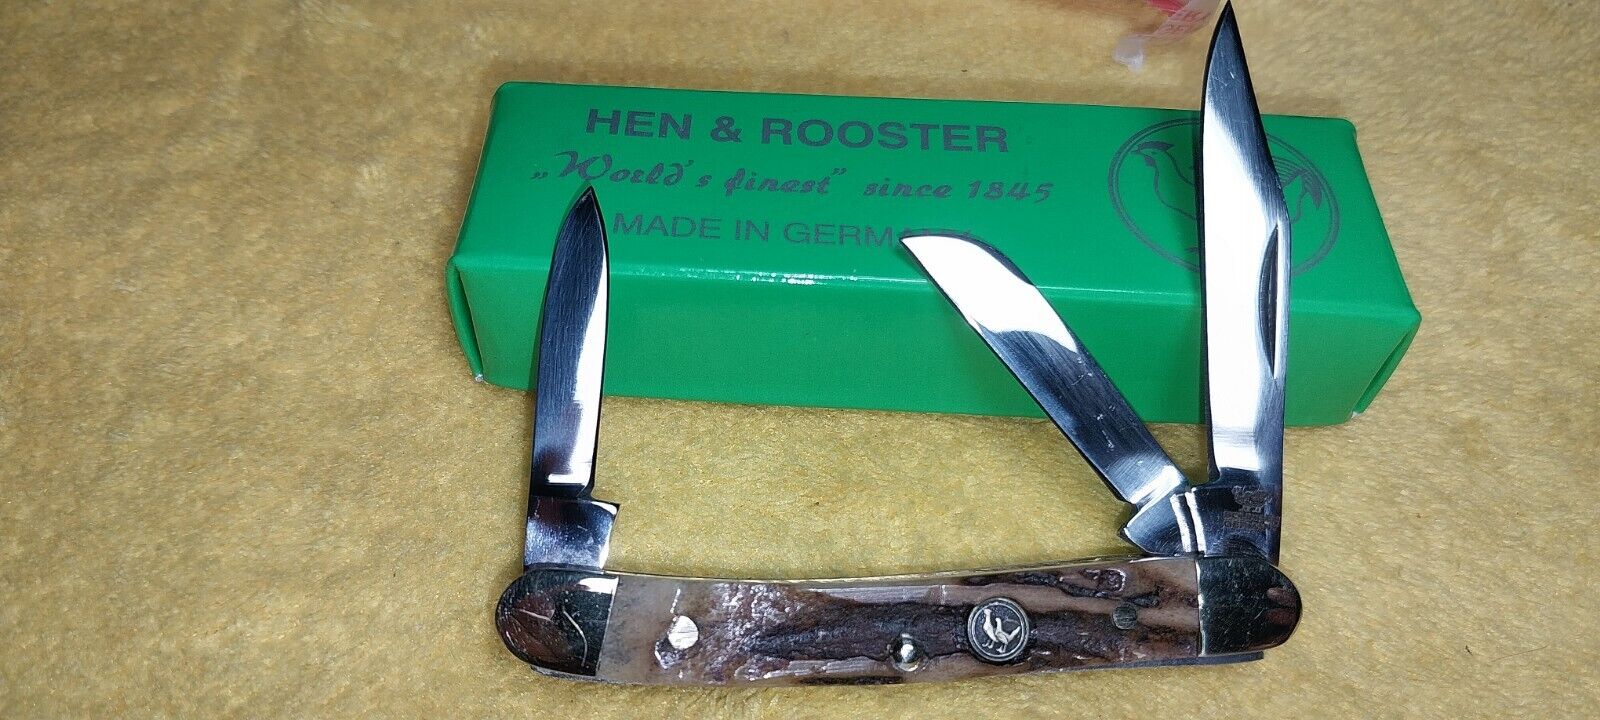  HEN & ROOSTER Knife NIB 3Blade Stockman Beautiful Stag Handles Rare  +Case 